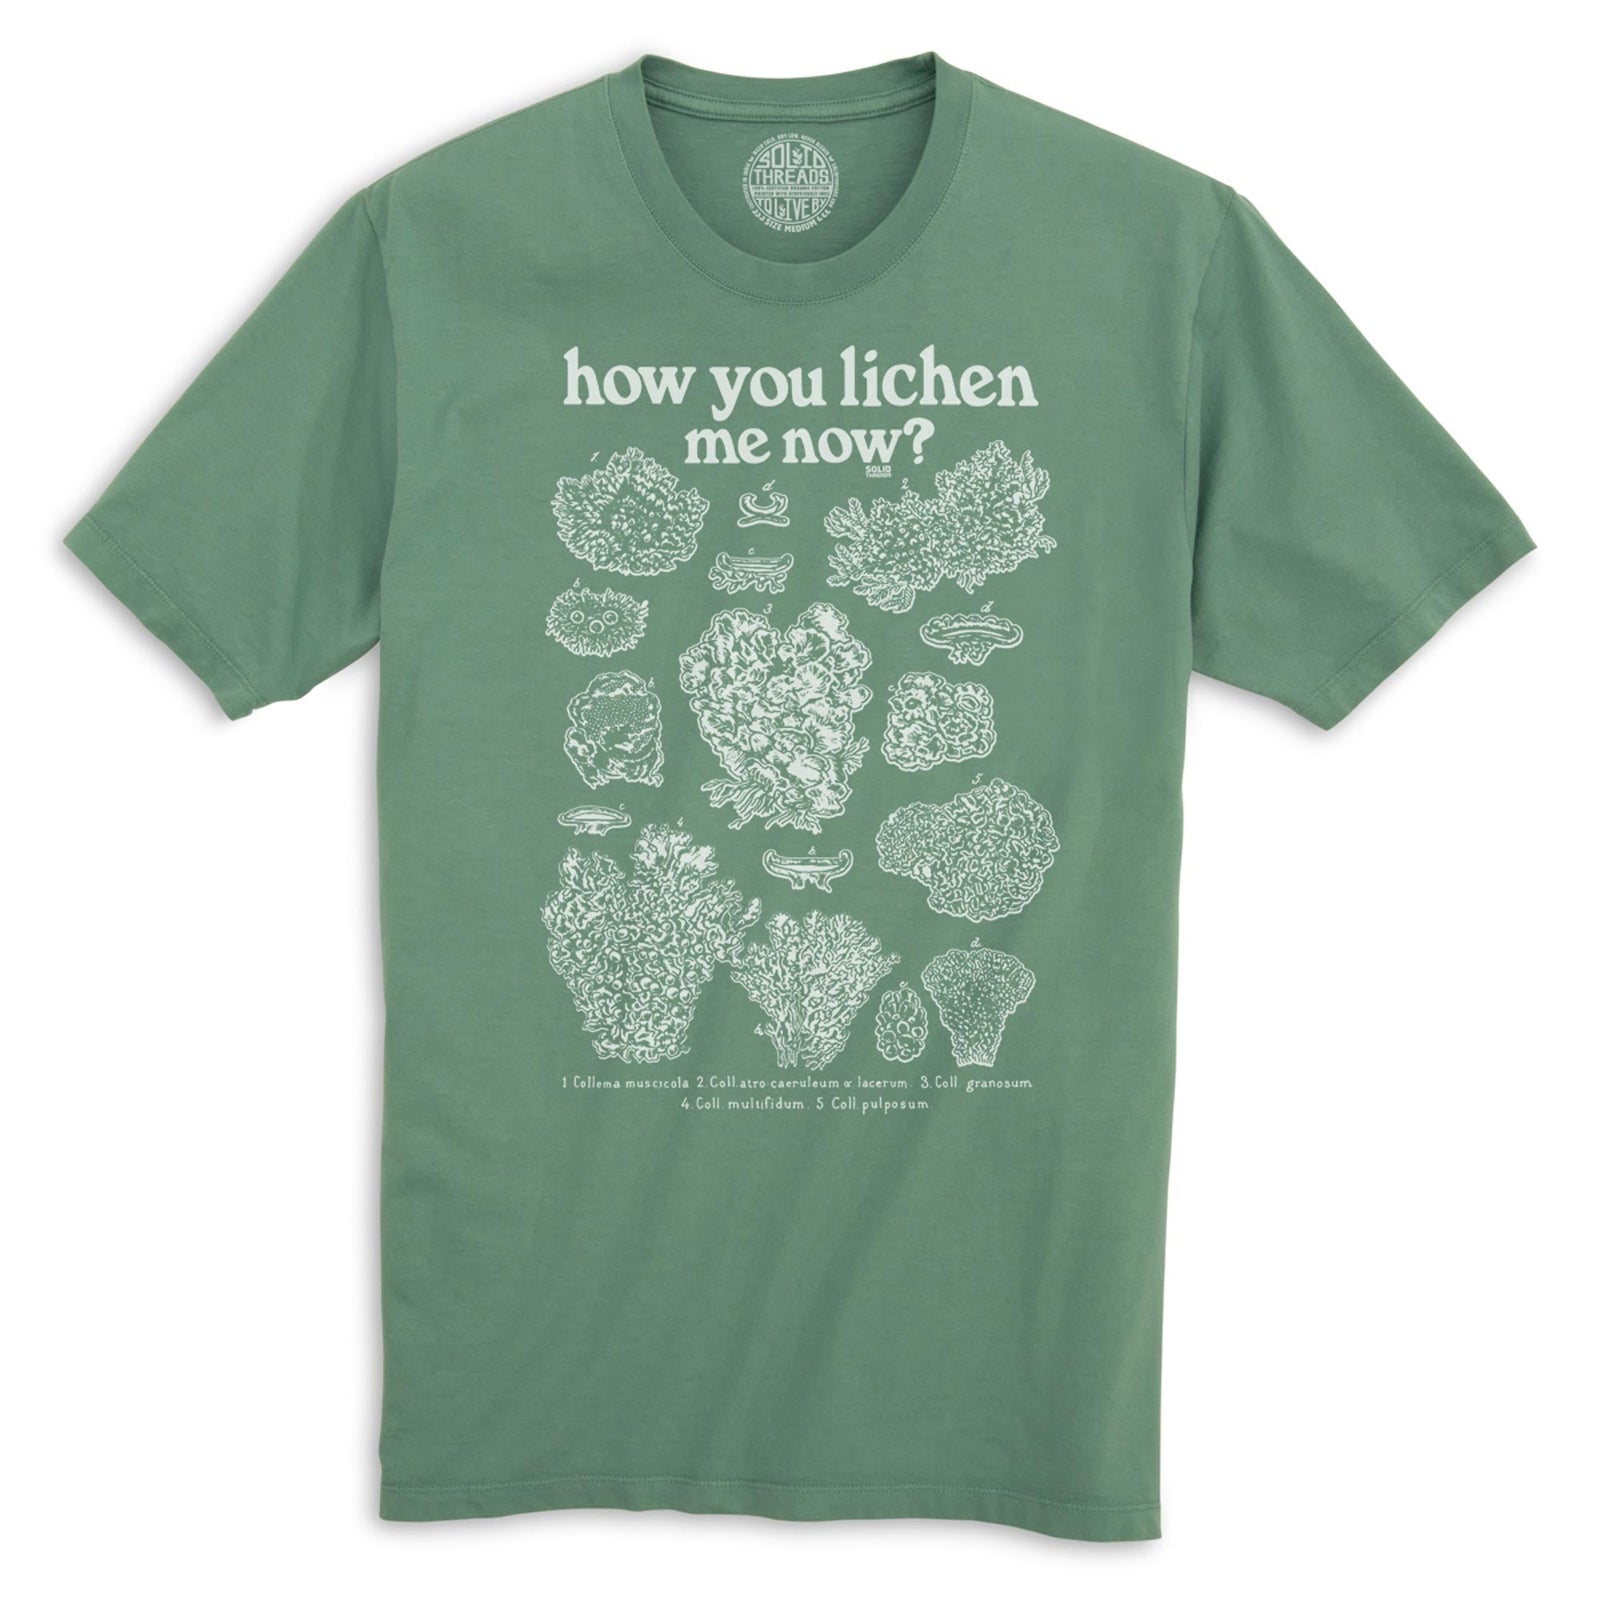 How You Lichen Me Now Funny Organic Cotton T-shirt | Retro Nature   Tee | Solid Threads